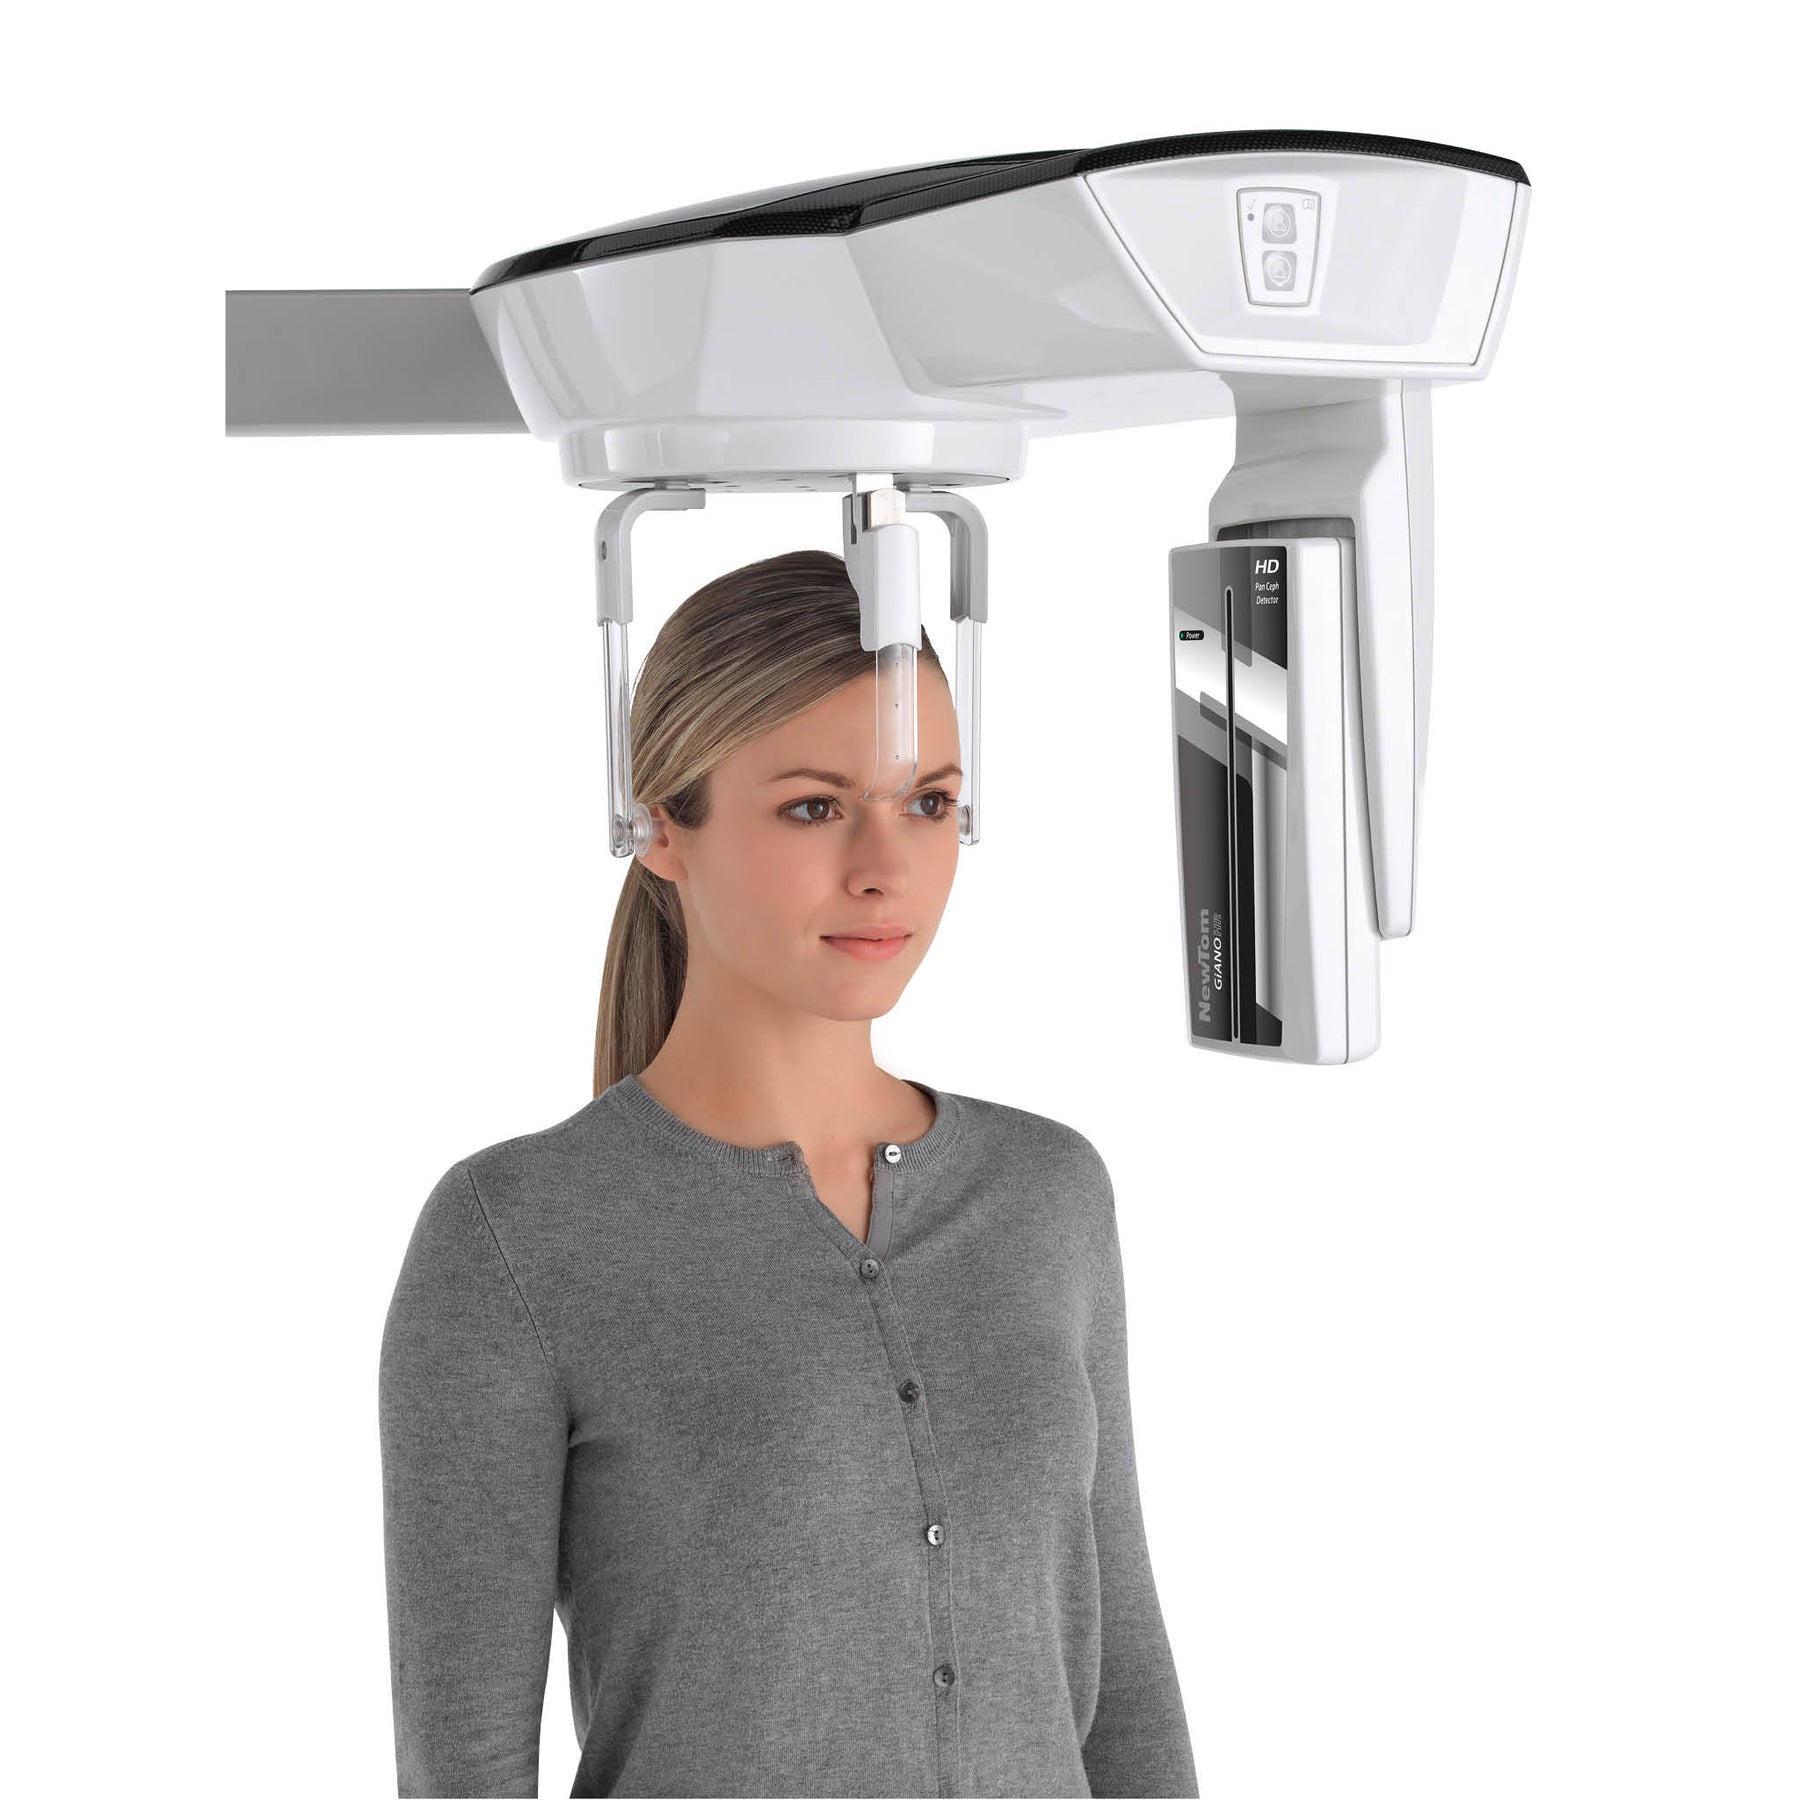 The GiANO HR is the complete hybrid CBCT for 2D/3D imaging. Auto-adaptive positioning with three laser guides and 7-point head support unit make the process easy and always ensures aligned images.